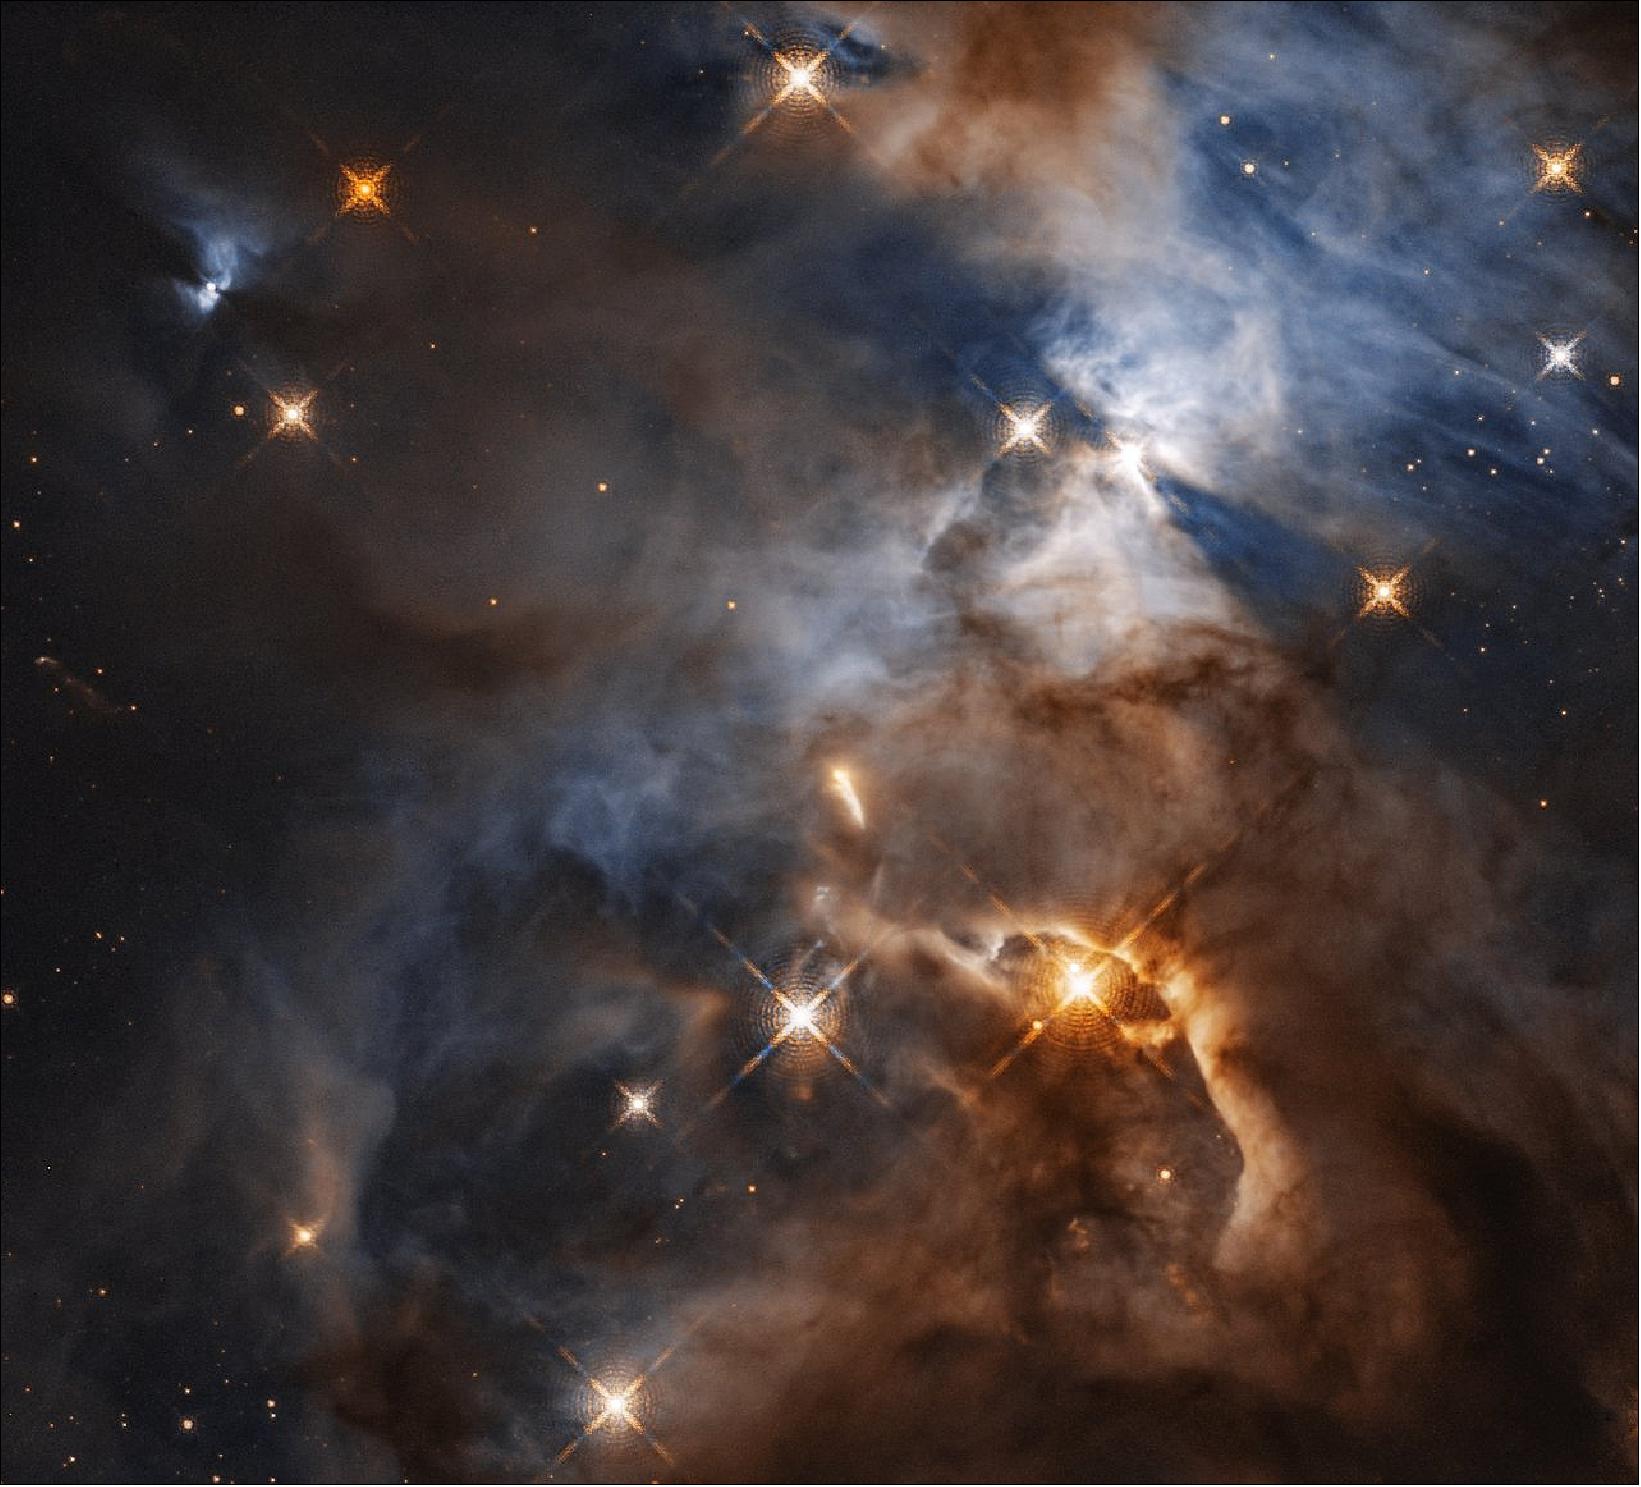 Figure 11: This image, taken with the NASA/ESA Hubble Space Telescope shows the Serpens Nebula, a stellar nursery about 1300 light-years away. Within the nebula, in the upper right of the image, a shadow is created by the protoplanetary disc surrounding the star HBC 672. While the disc of debris is too tiny to be seen even by Hubble, its shadow is projected upon the cloud in which it was born. In this view, the feature – nicknamed the Bat Shadow – spans approximately 200 times the diameter of our own Solar System. - A similar looking shadow phenomenon can be seen emanating from another young star, in the upper left of the image (image credit: NASA, ESA, and STScI, CC BY 4.0)